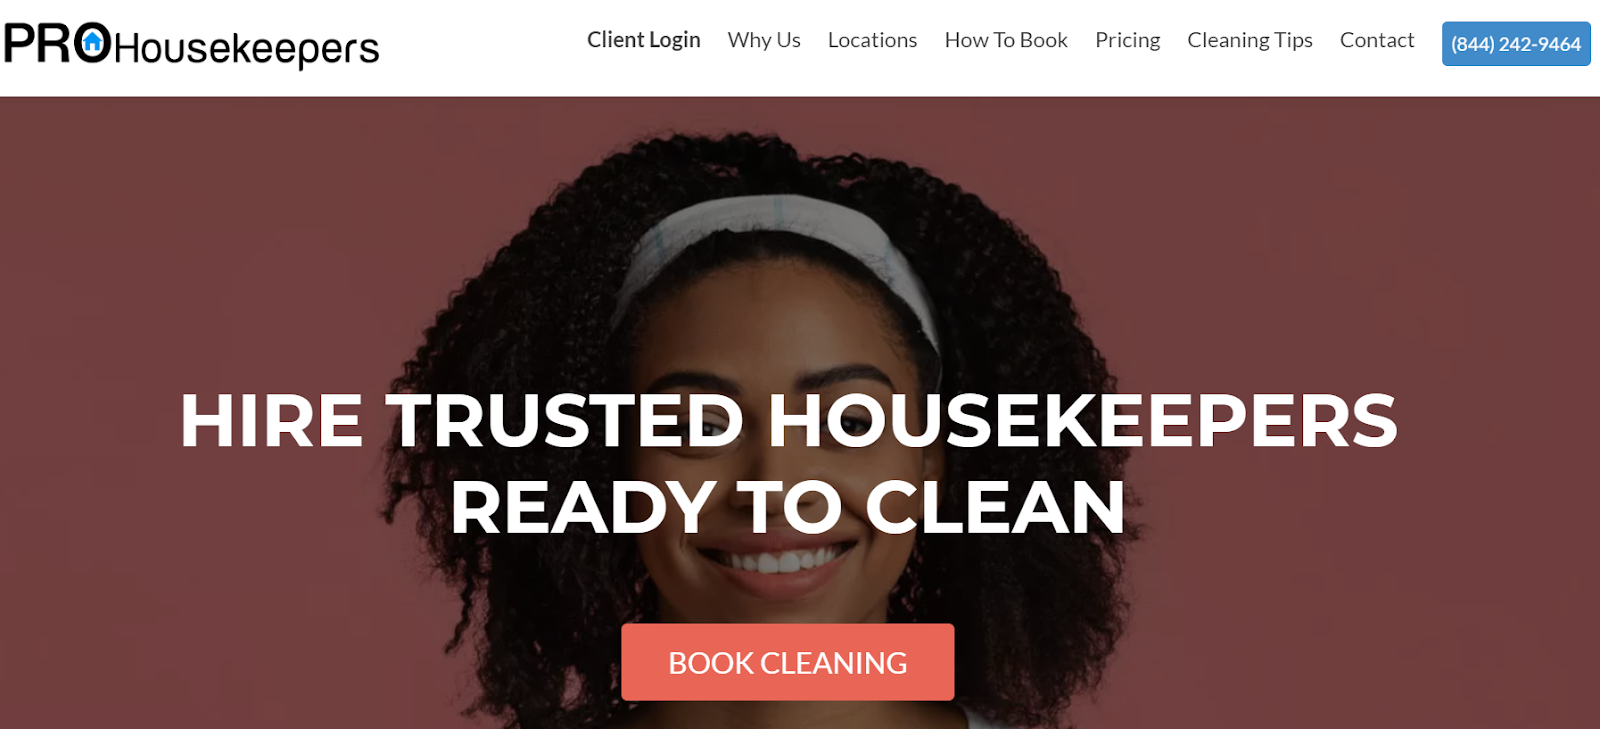 cleaning company websites, Pro Housekeepers